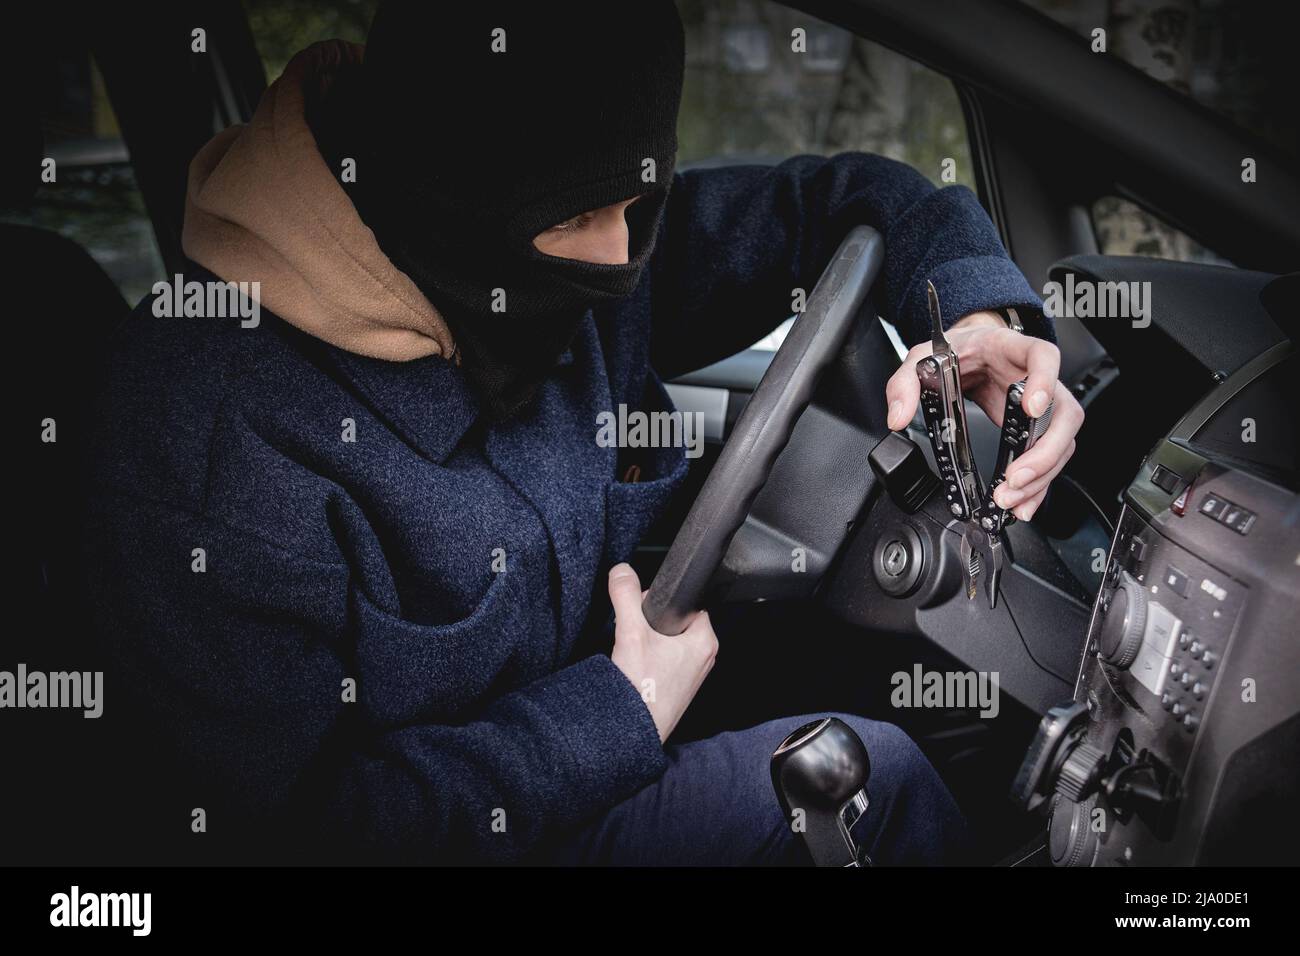 A car thief in a mask excluding recognition, tries to open the ignition lock with a tool. Crime, car theft Stock Photo